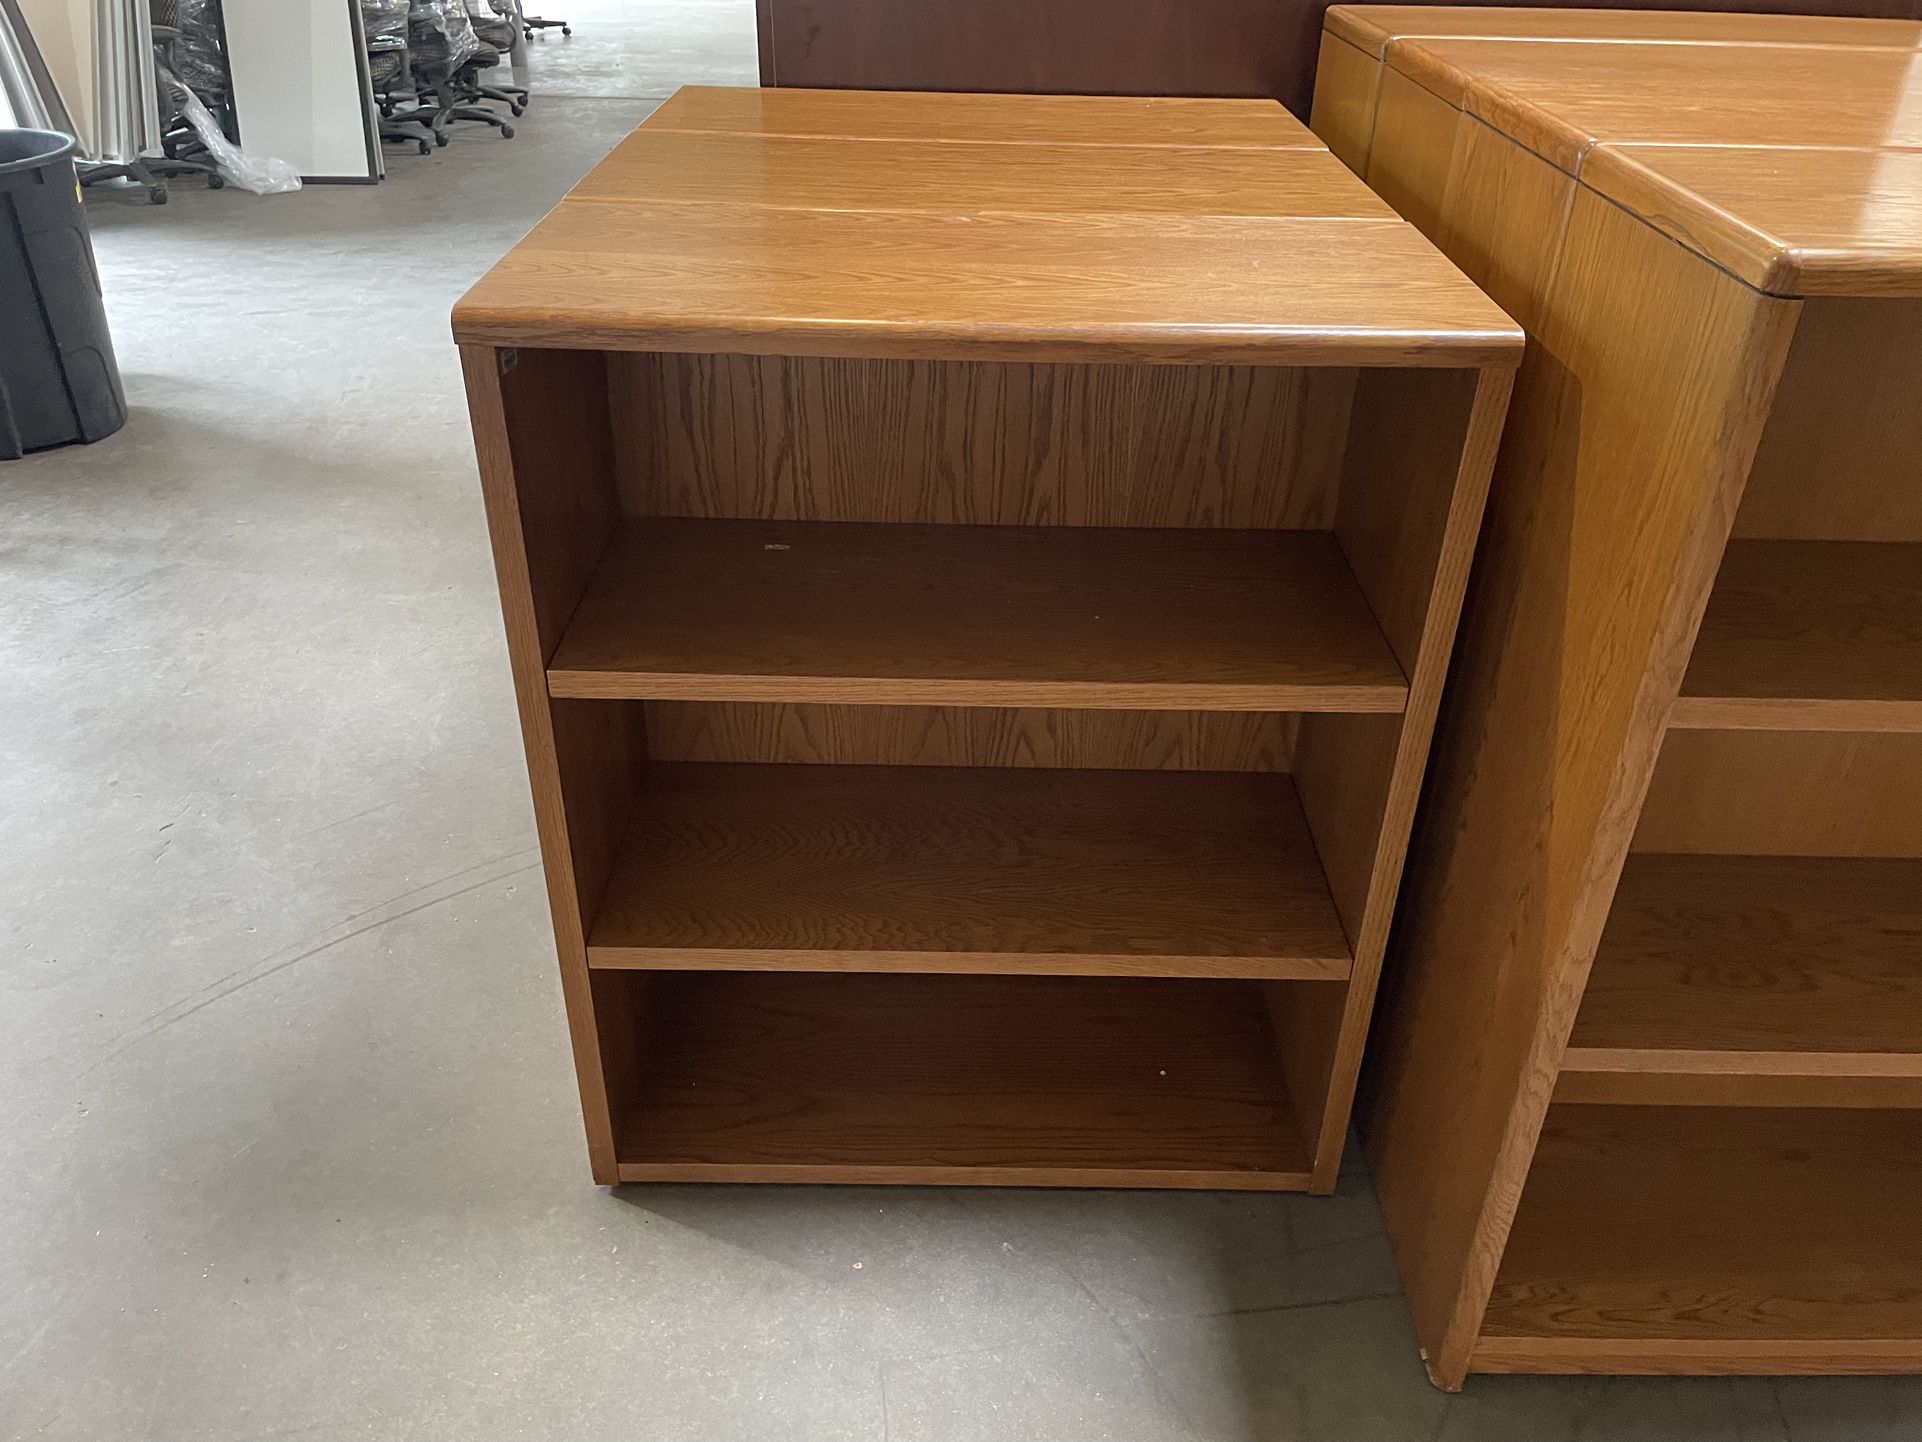 5 Steelcase Oak Office Bookcases! Sturdy! Only $40 Ea!